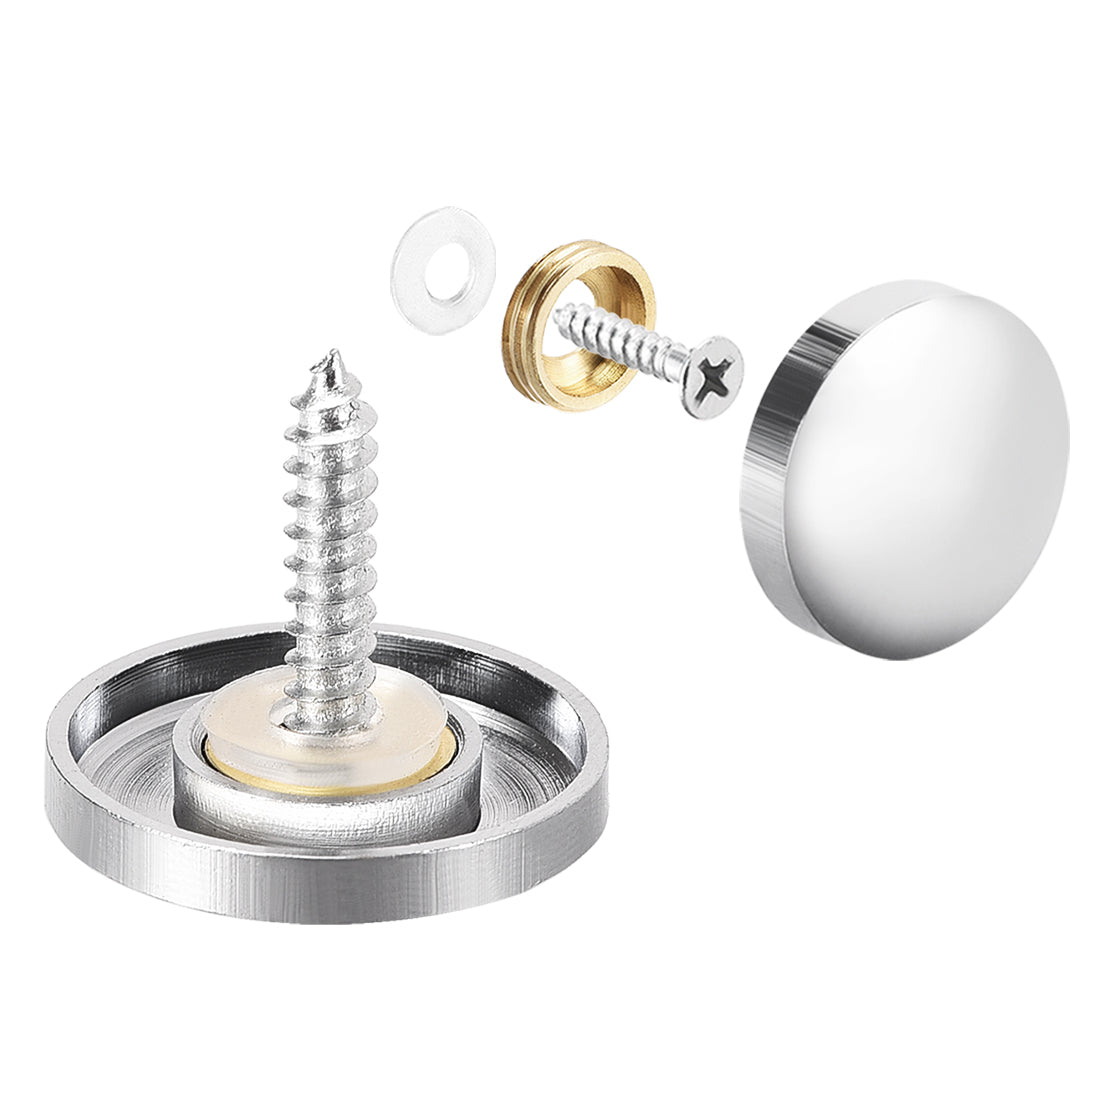 Uxcell Uxcell Mirror Screws, Decorative Cap Fasteners Cover Nails, Electroplated, Bright Silvery 22mm/0.87" Brass 4pcs